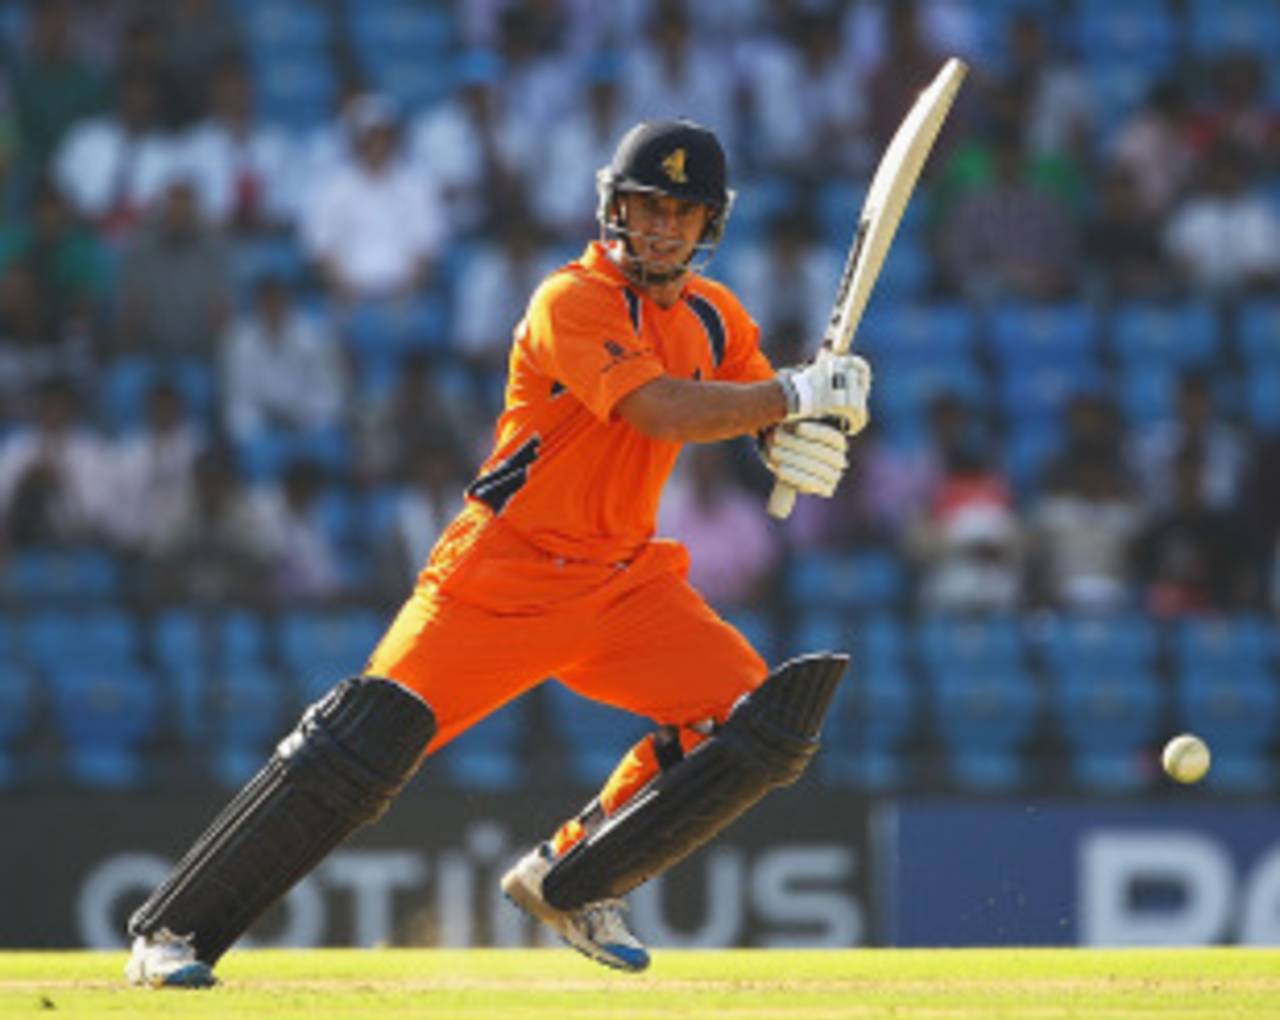 Ryan ten Doeschate played some classy shots, England v Netherlands, Group B, World Cup, Nagpur, February 22, 2011